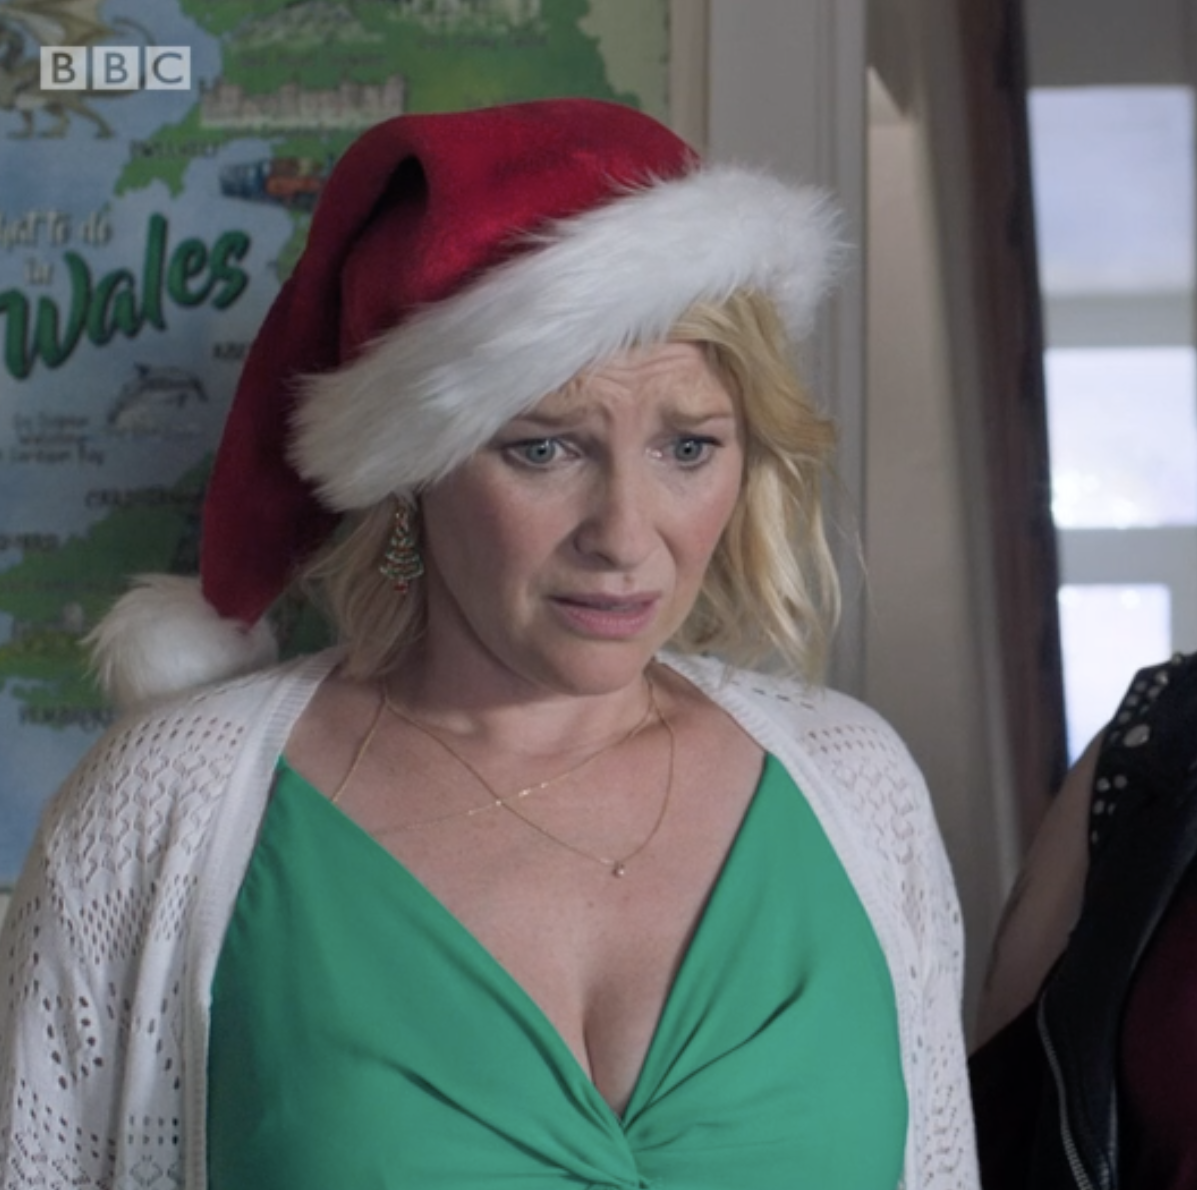 Gavin and Stacey Christmas special